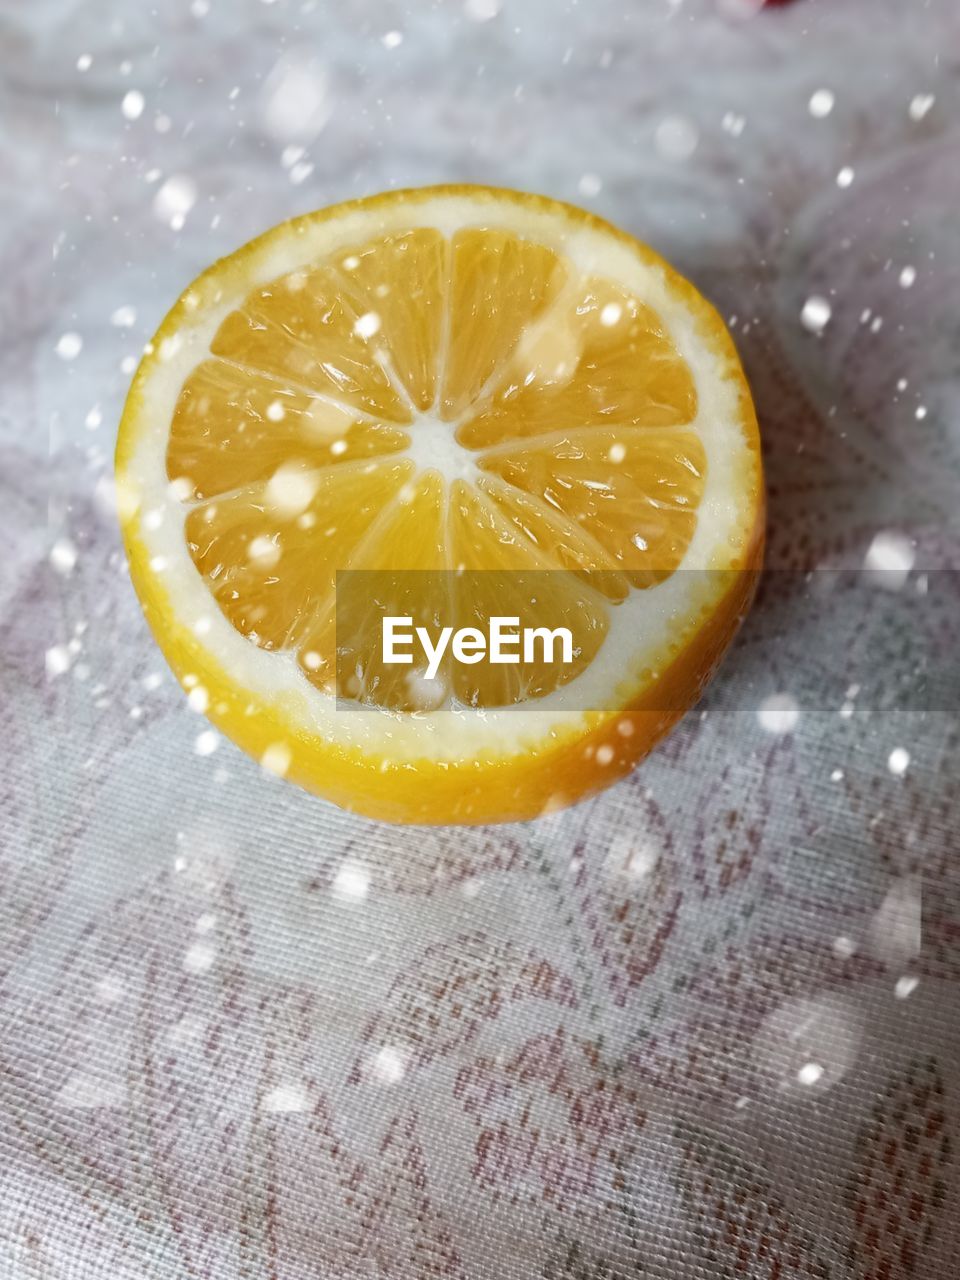 HIGH ANGLE VIEW OF LEMON IN WATER